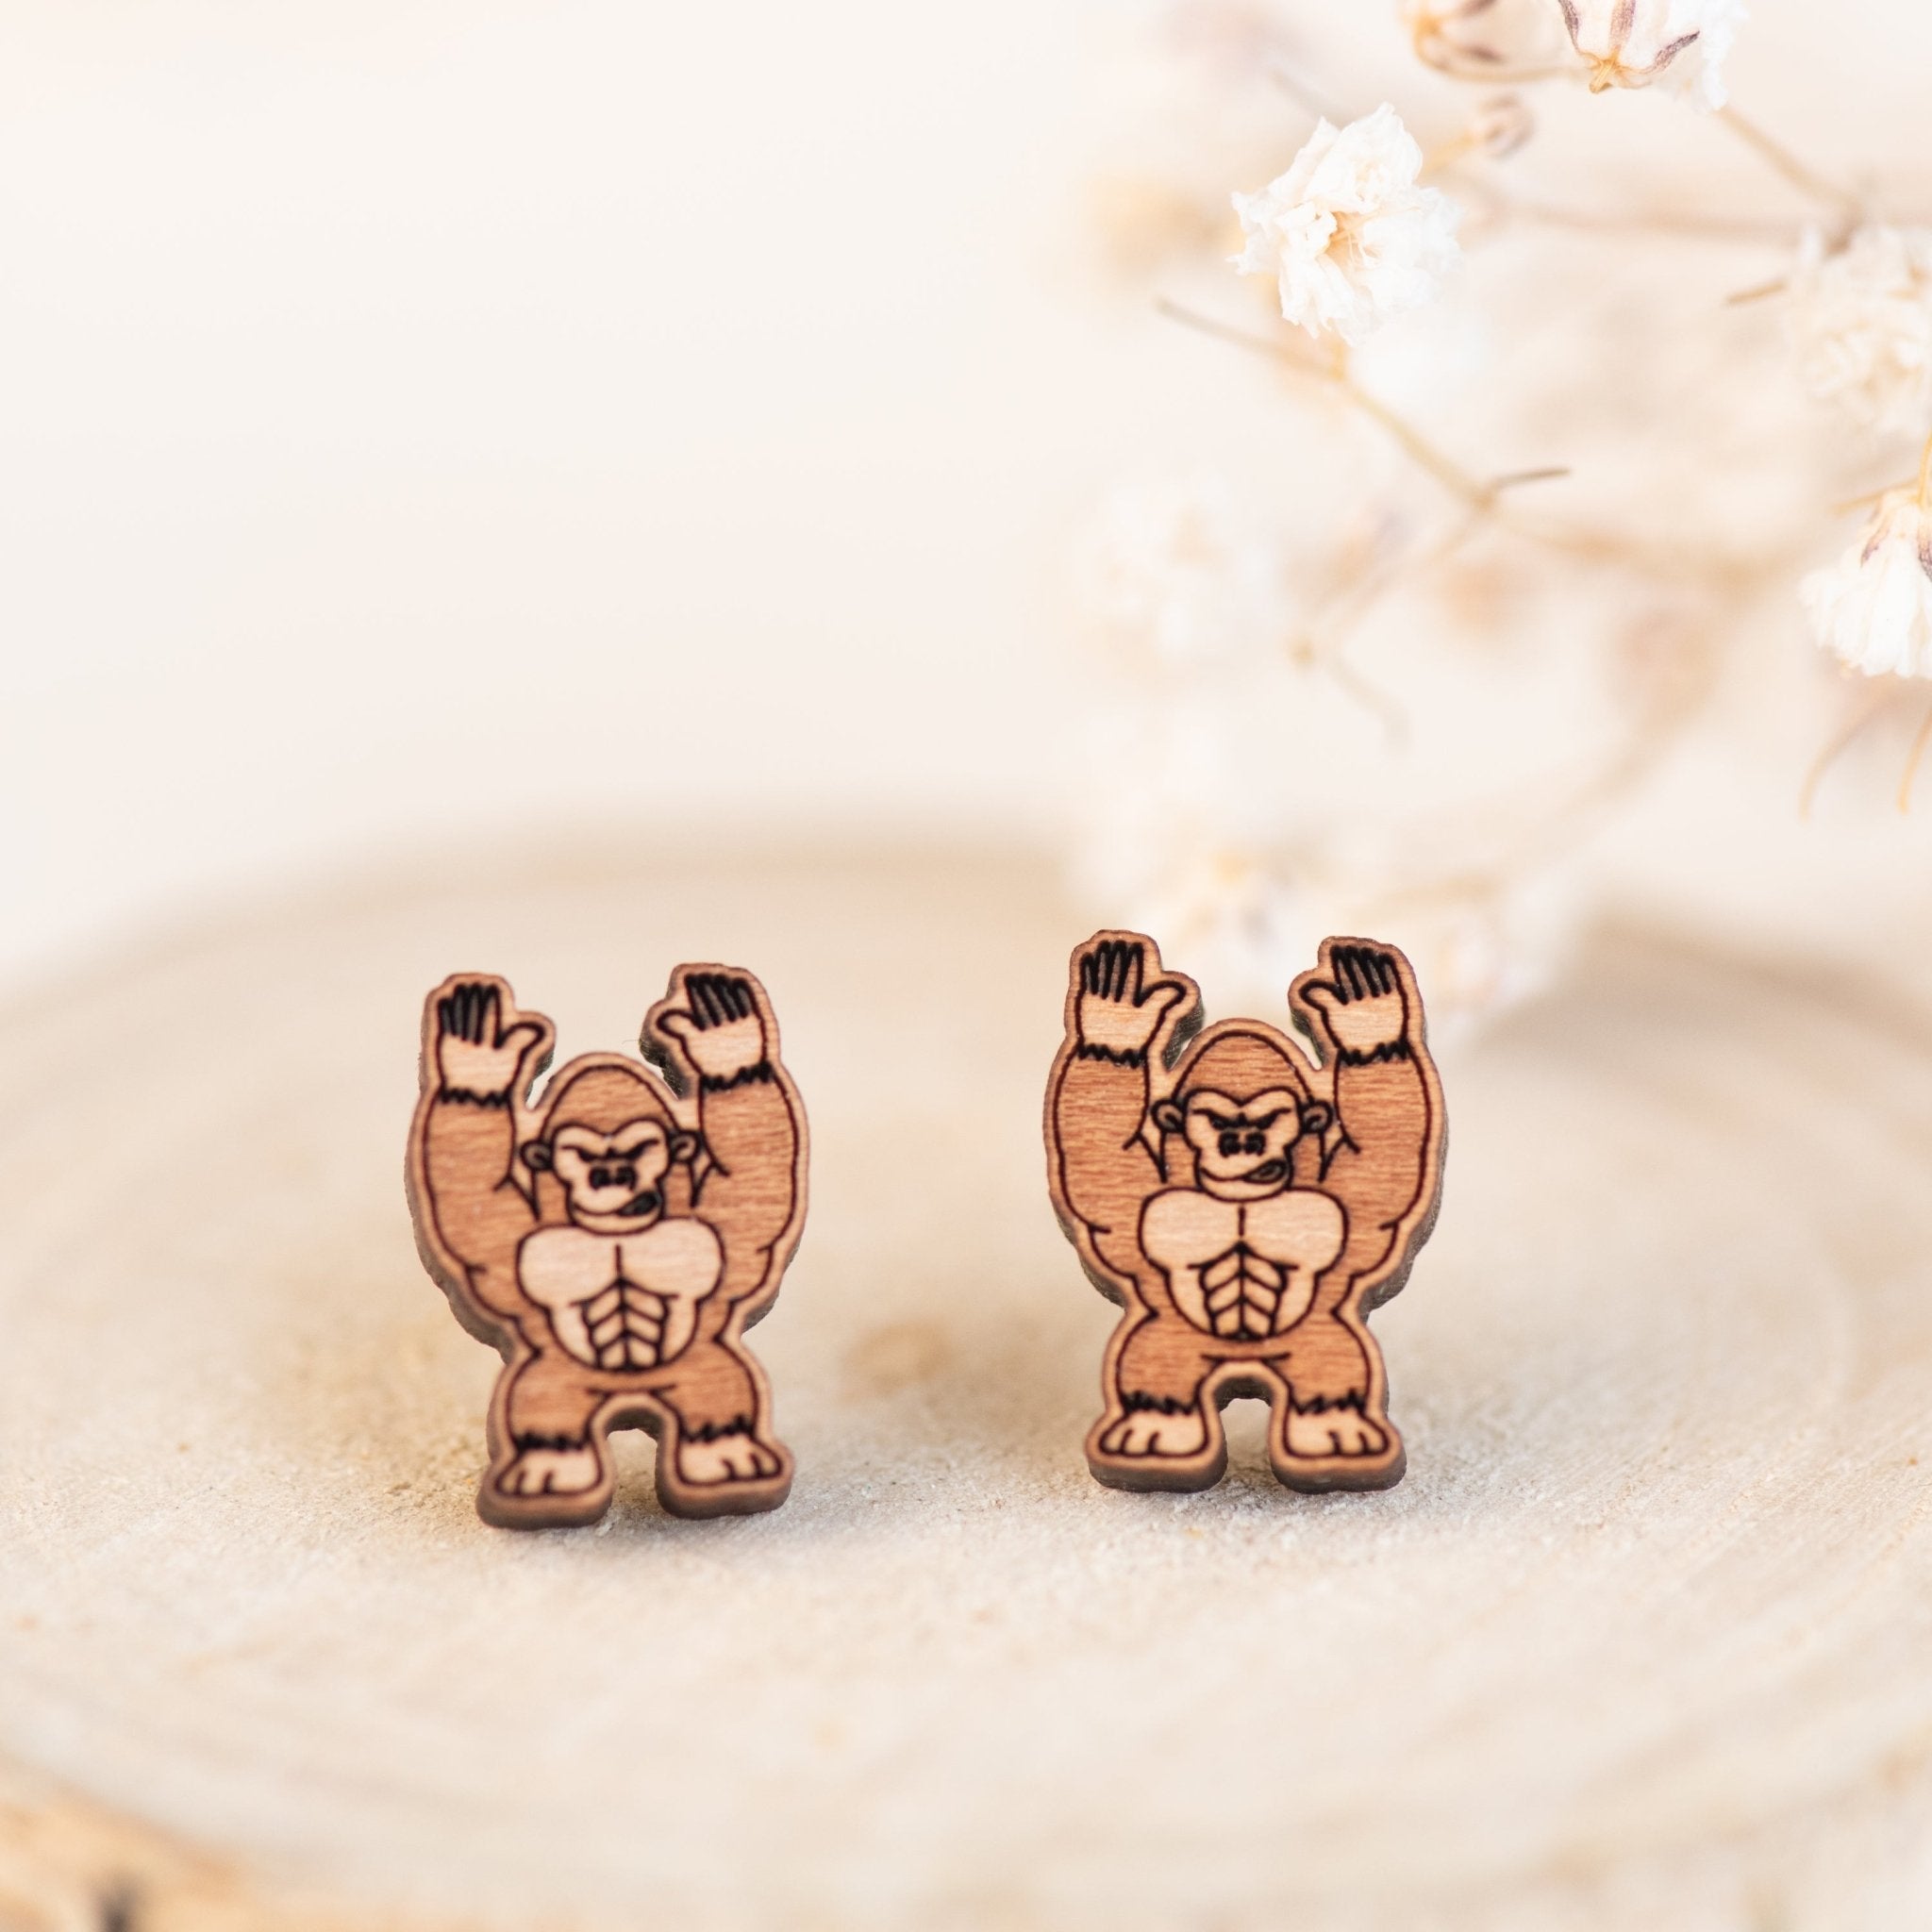 Gorilla (Angry) Wooden Earrings - EL10157 - Robin Valley Official Store